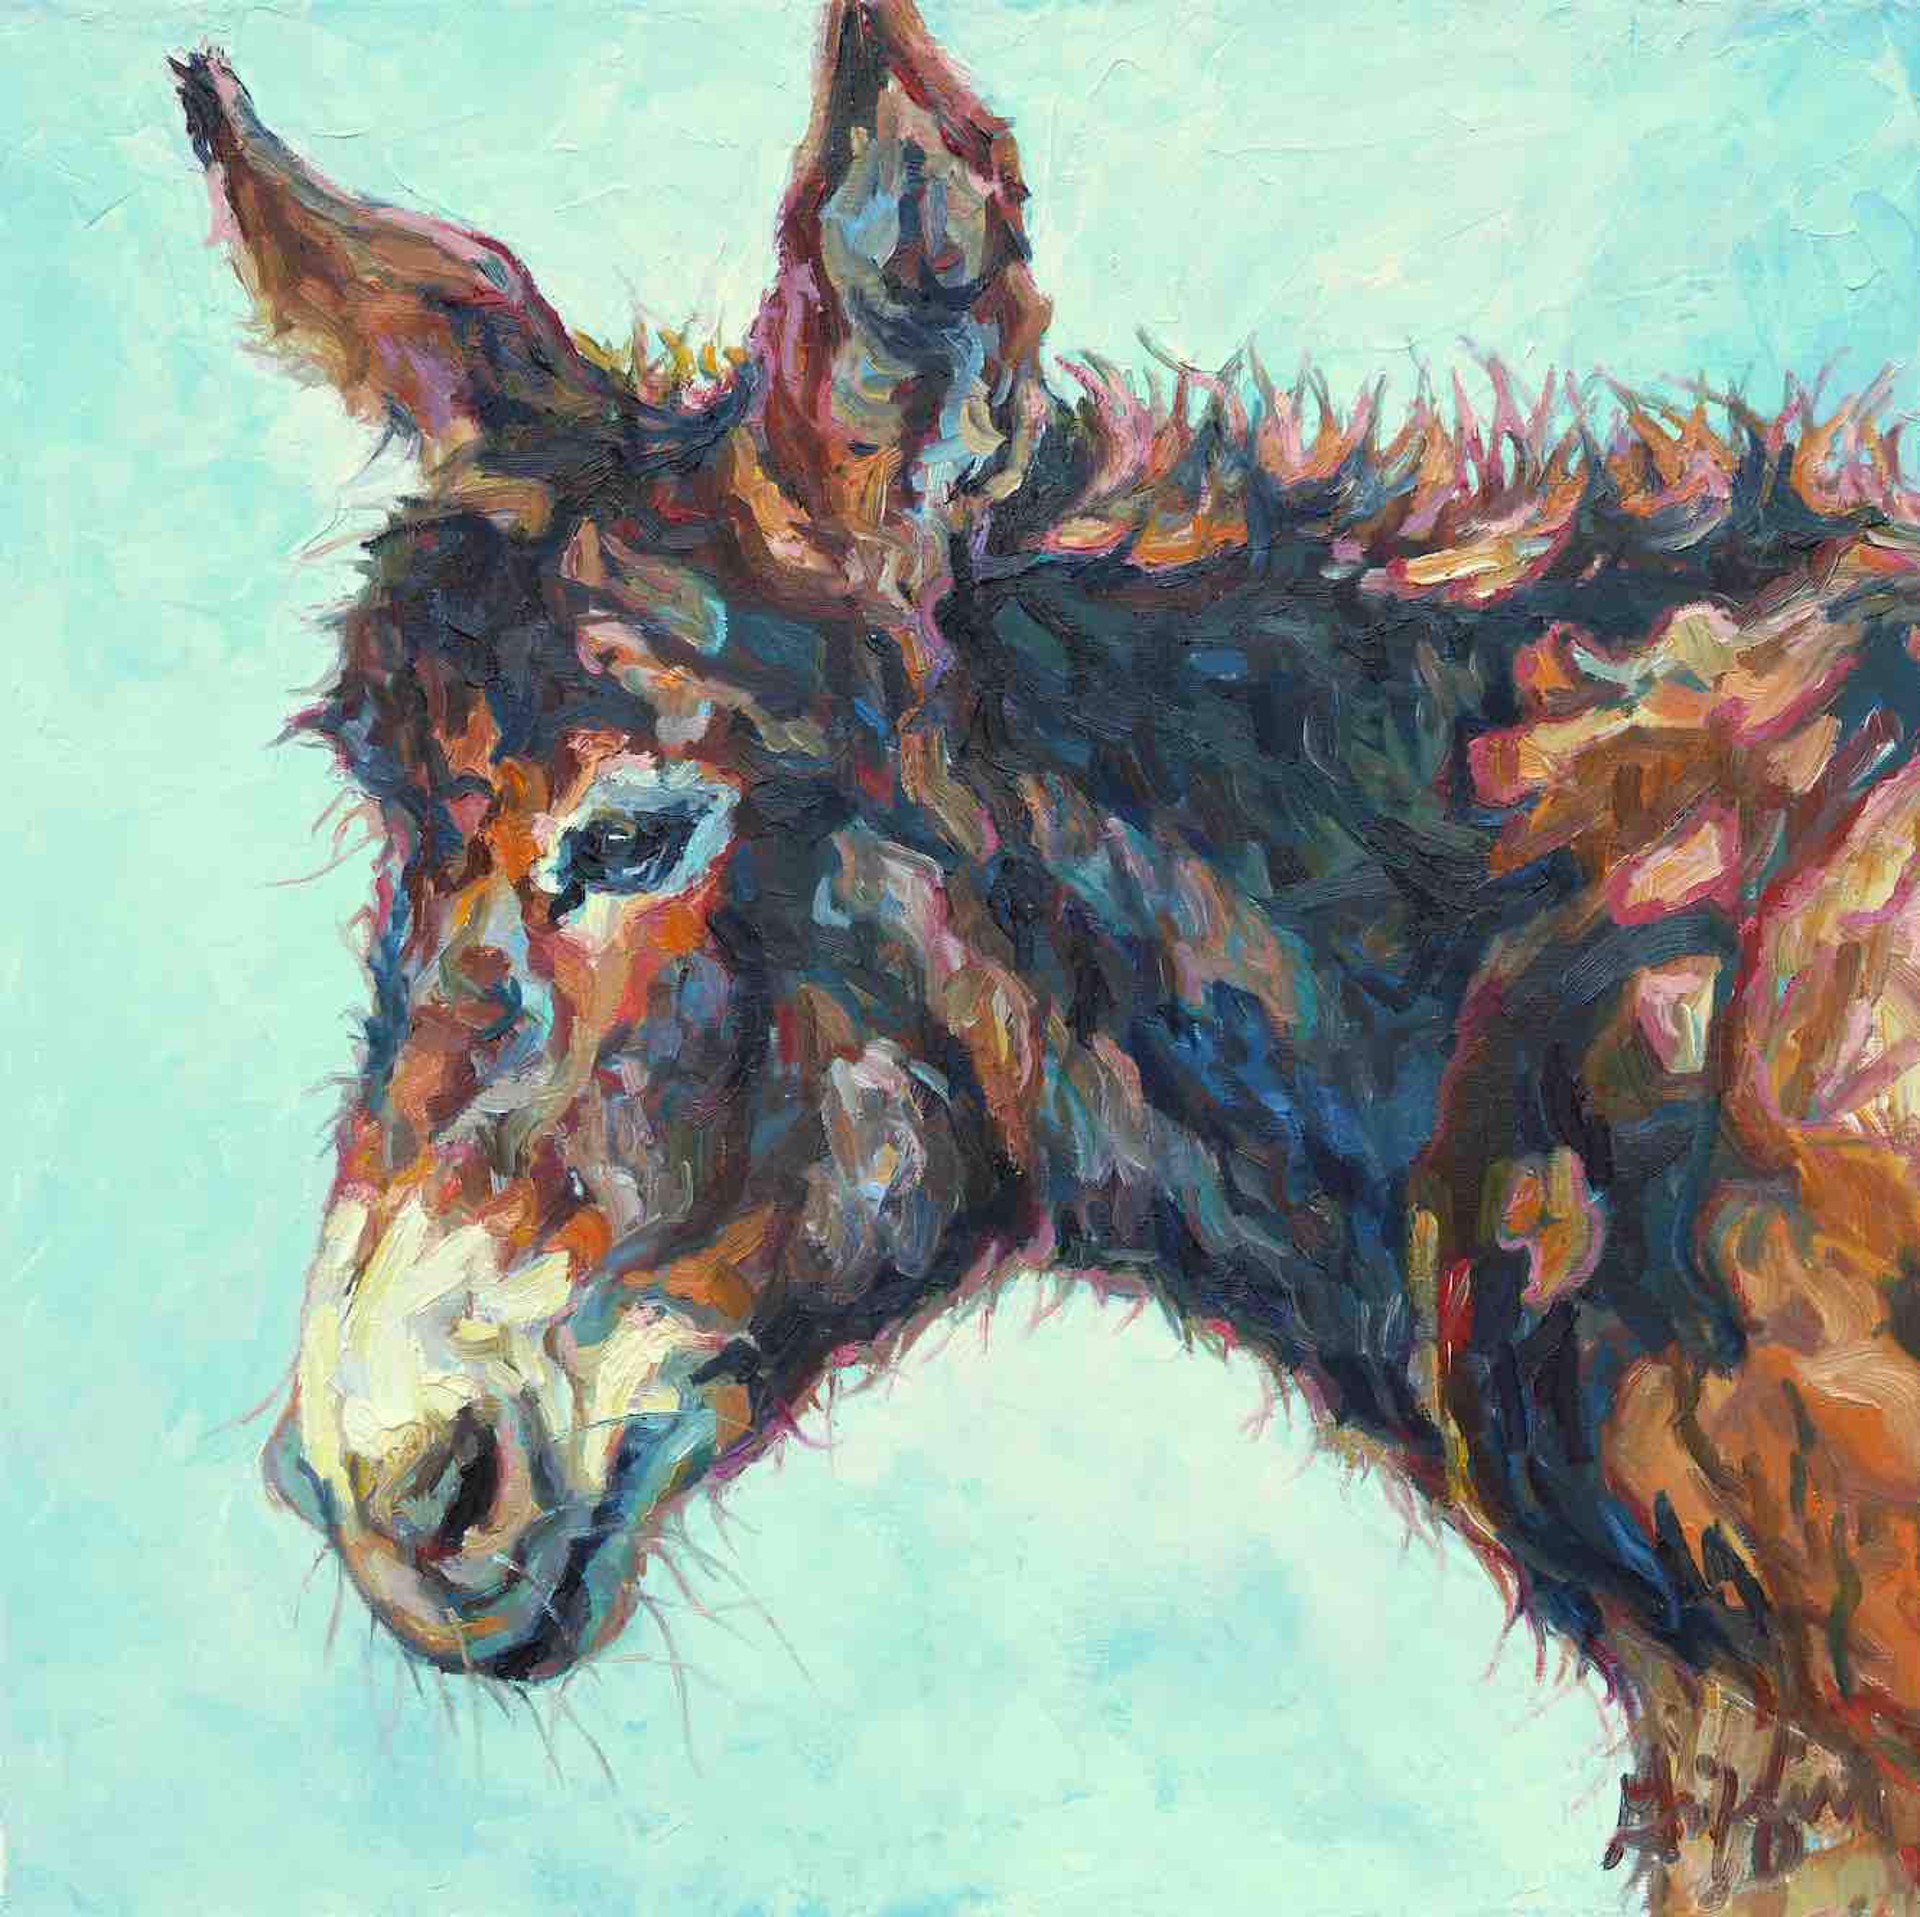 Wild Burro Portrait With Orange Sunlight And Blue Shadows By Patricia Griffin At Gallery WIld.